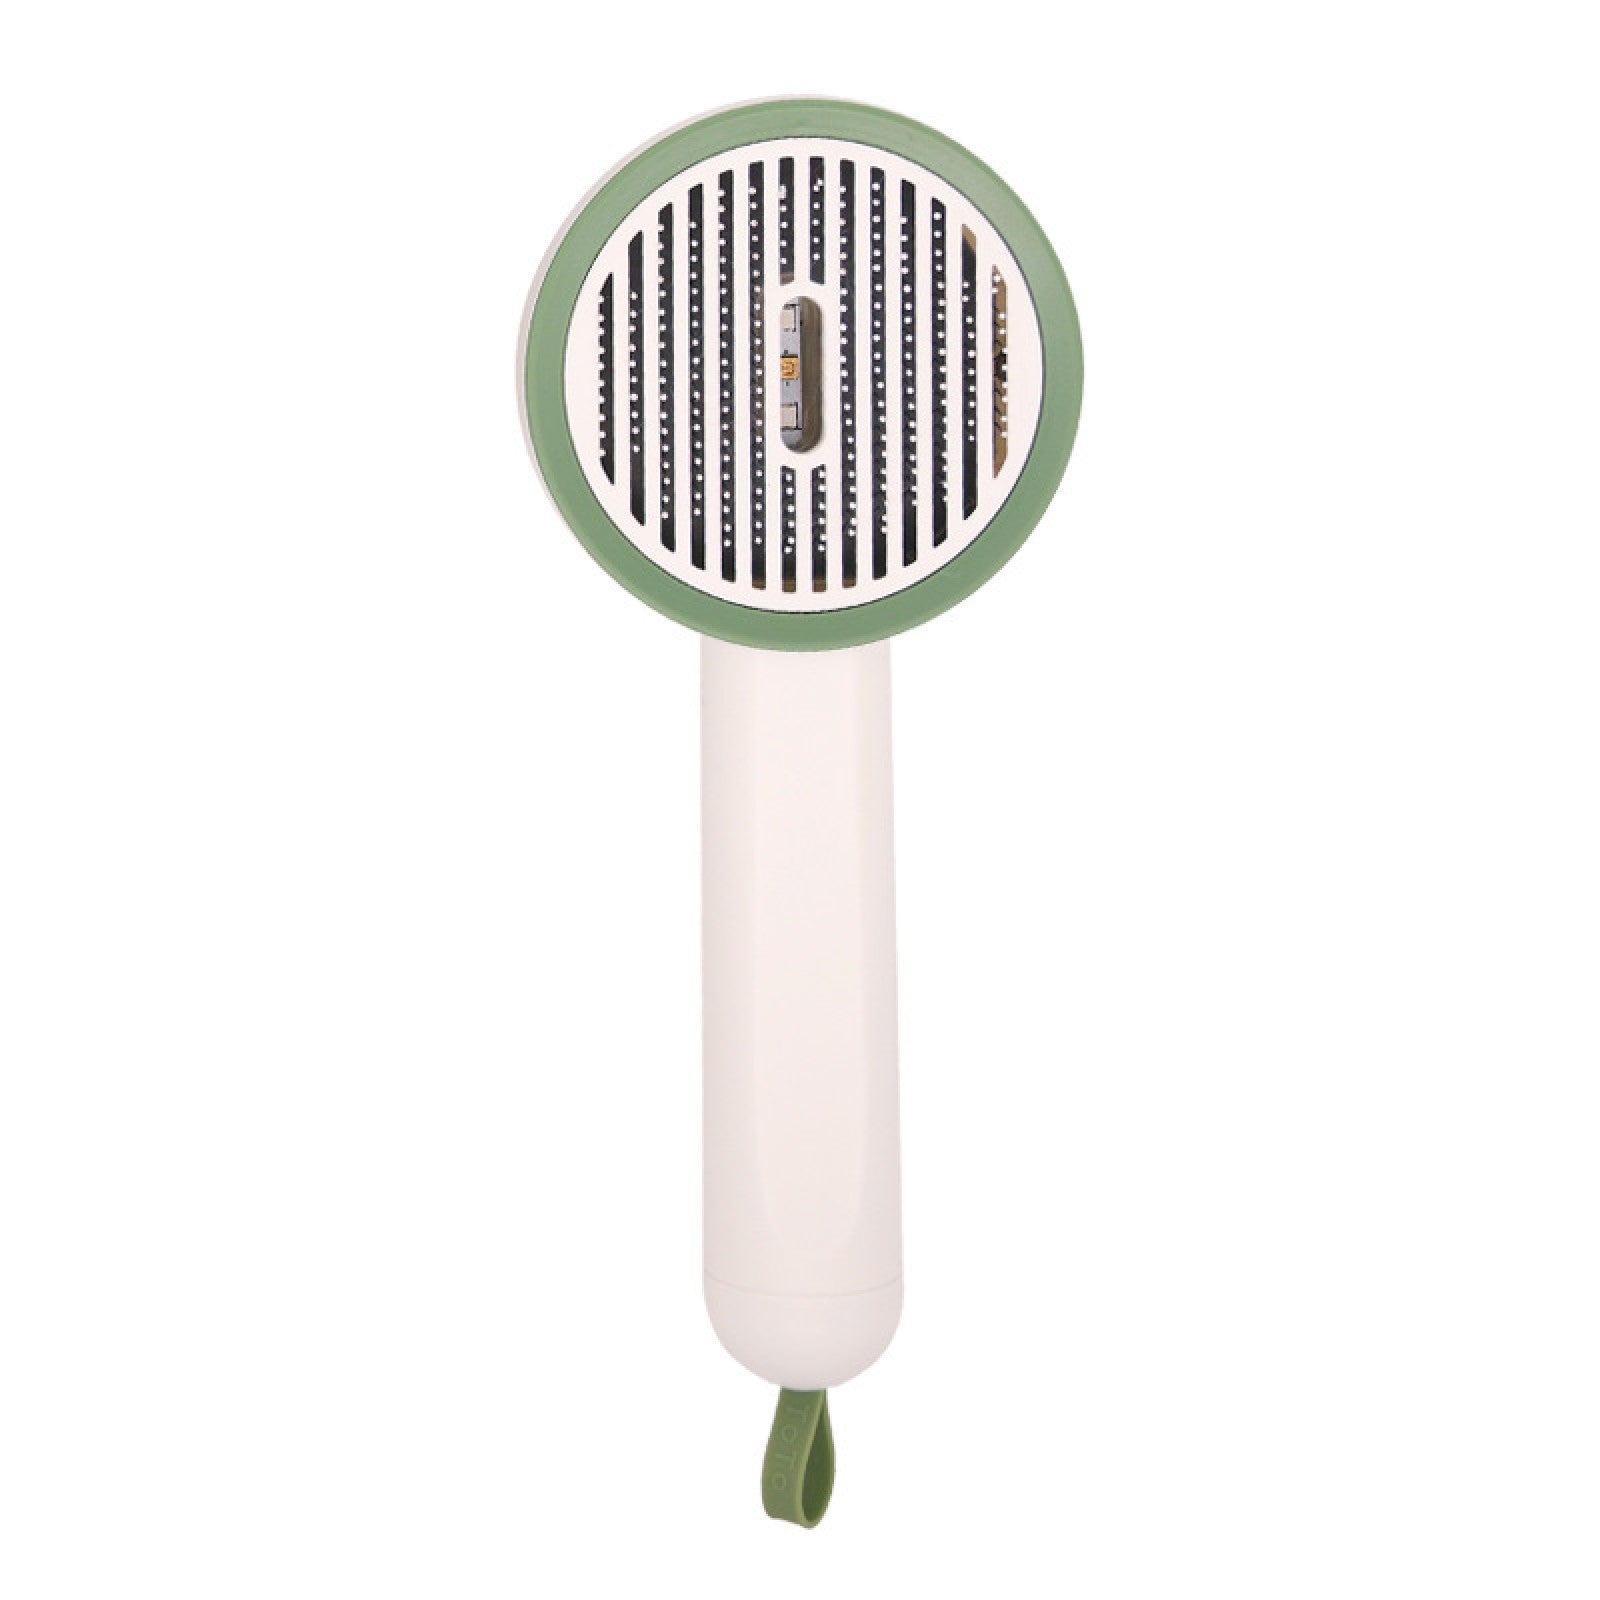 Pet Germicidal Sterilizing Comb Usb Rechargeable Cat Dog Automatic Hair Removal Brush Floating Beauty Comb Grooming Tool